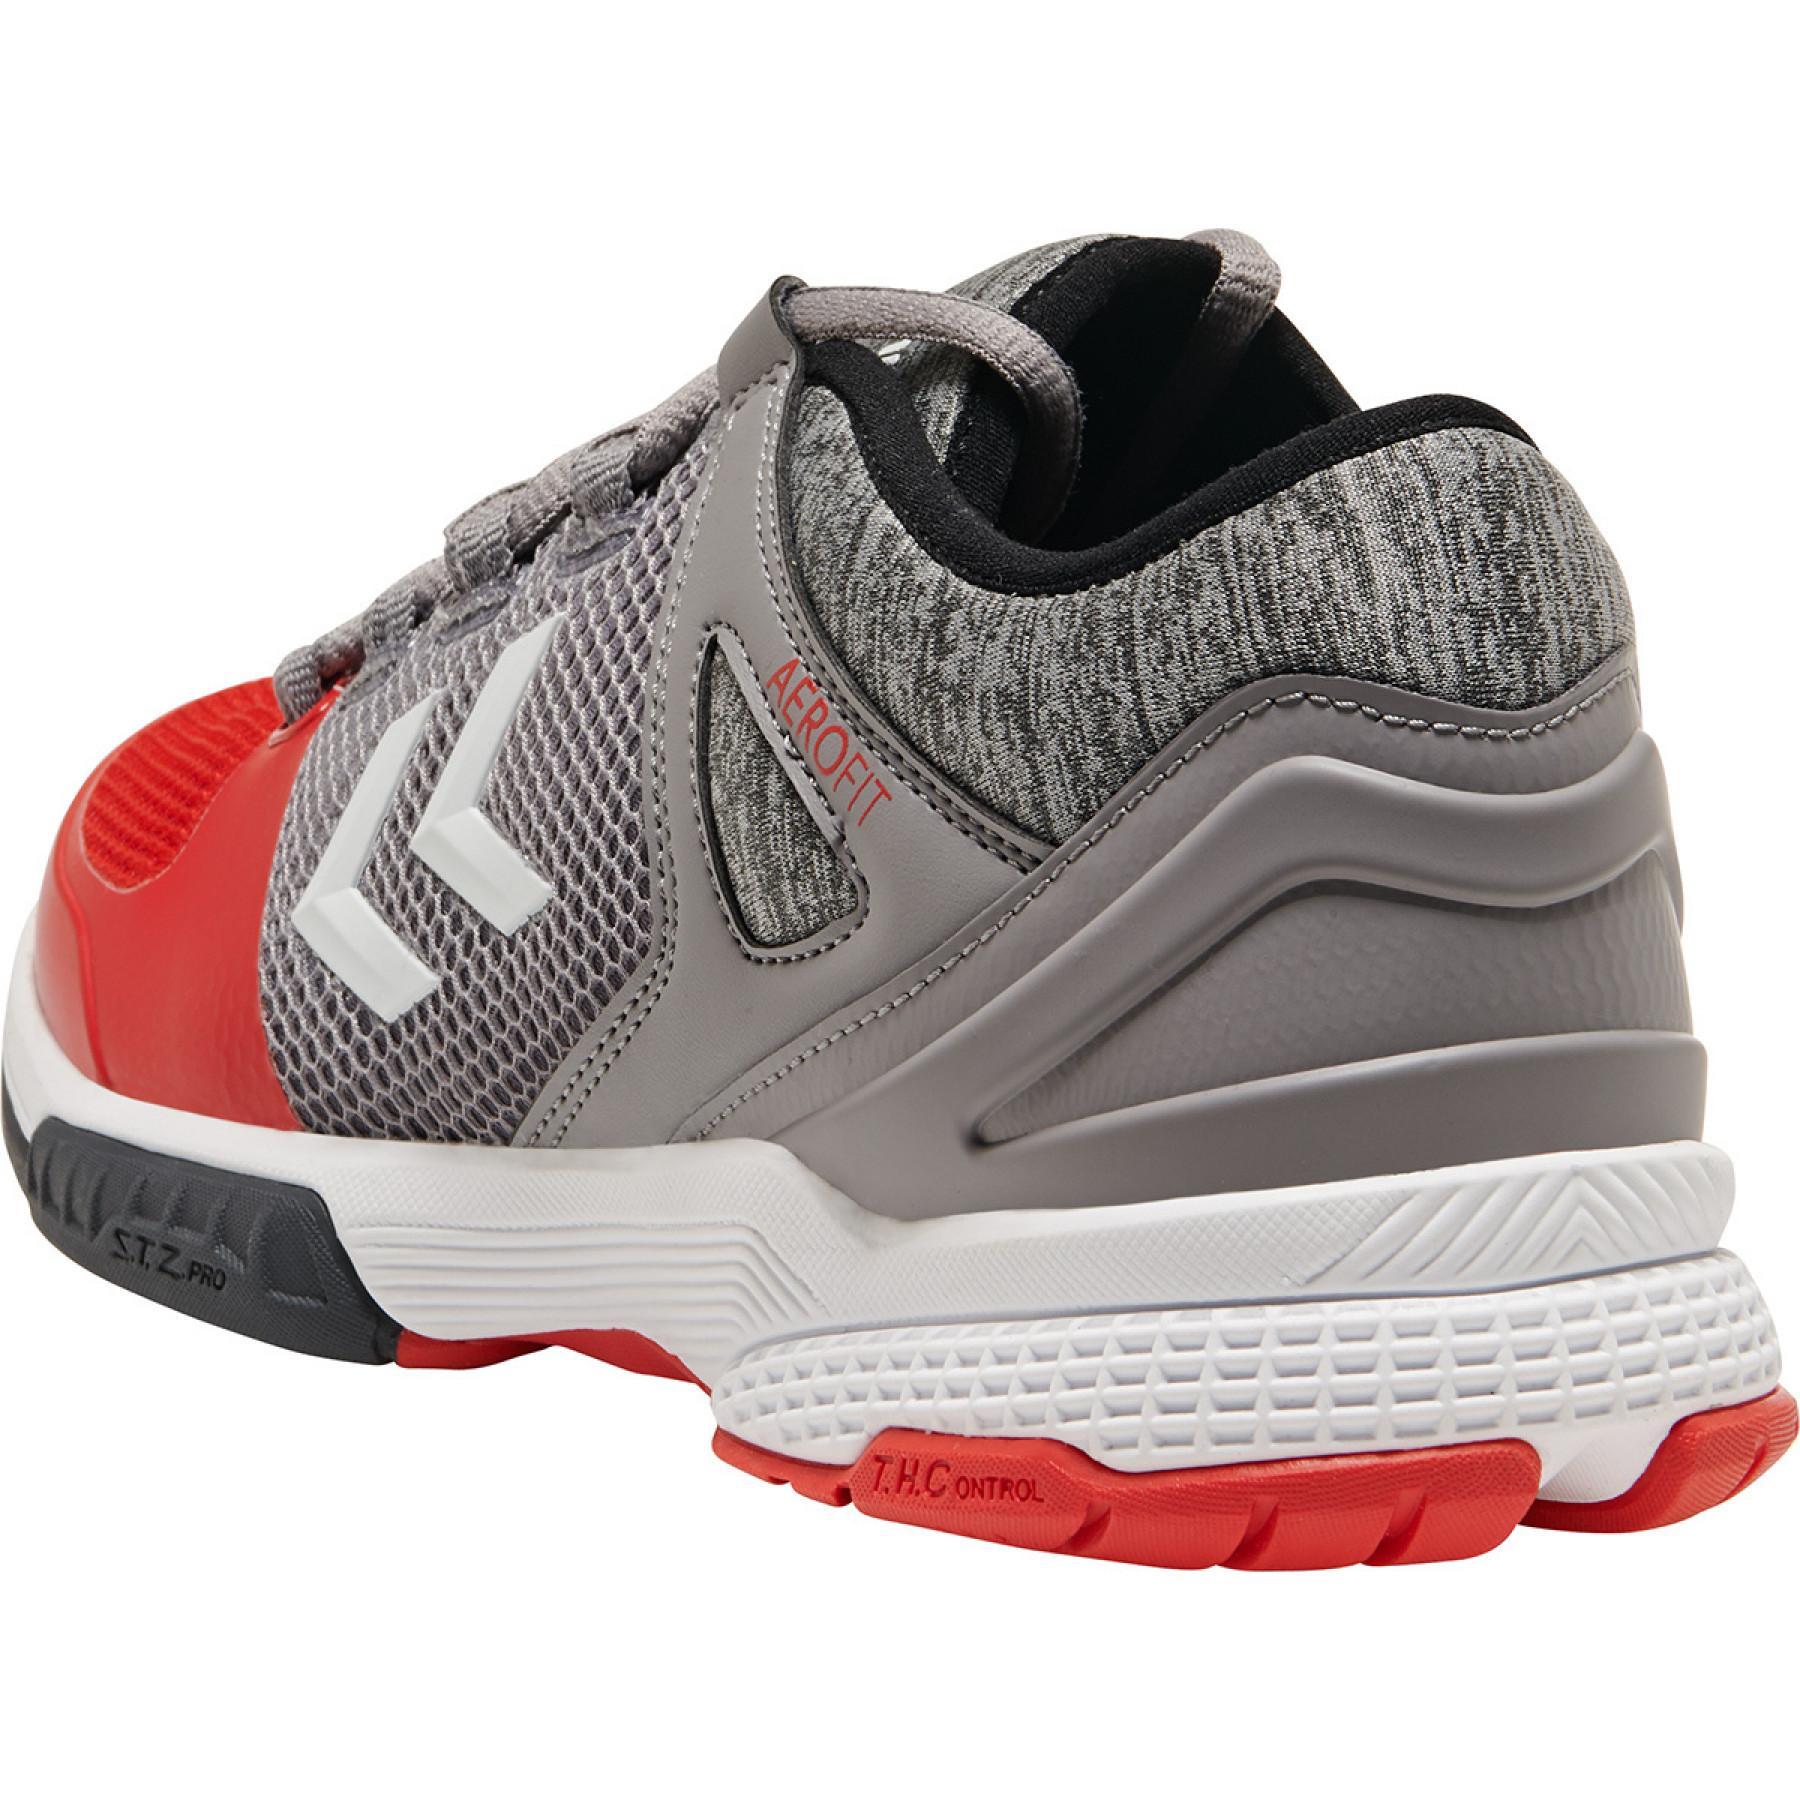 Chaussures Hummel aerocharge hb200 speed 3.0 trophy